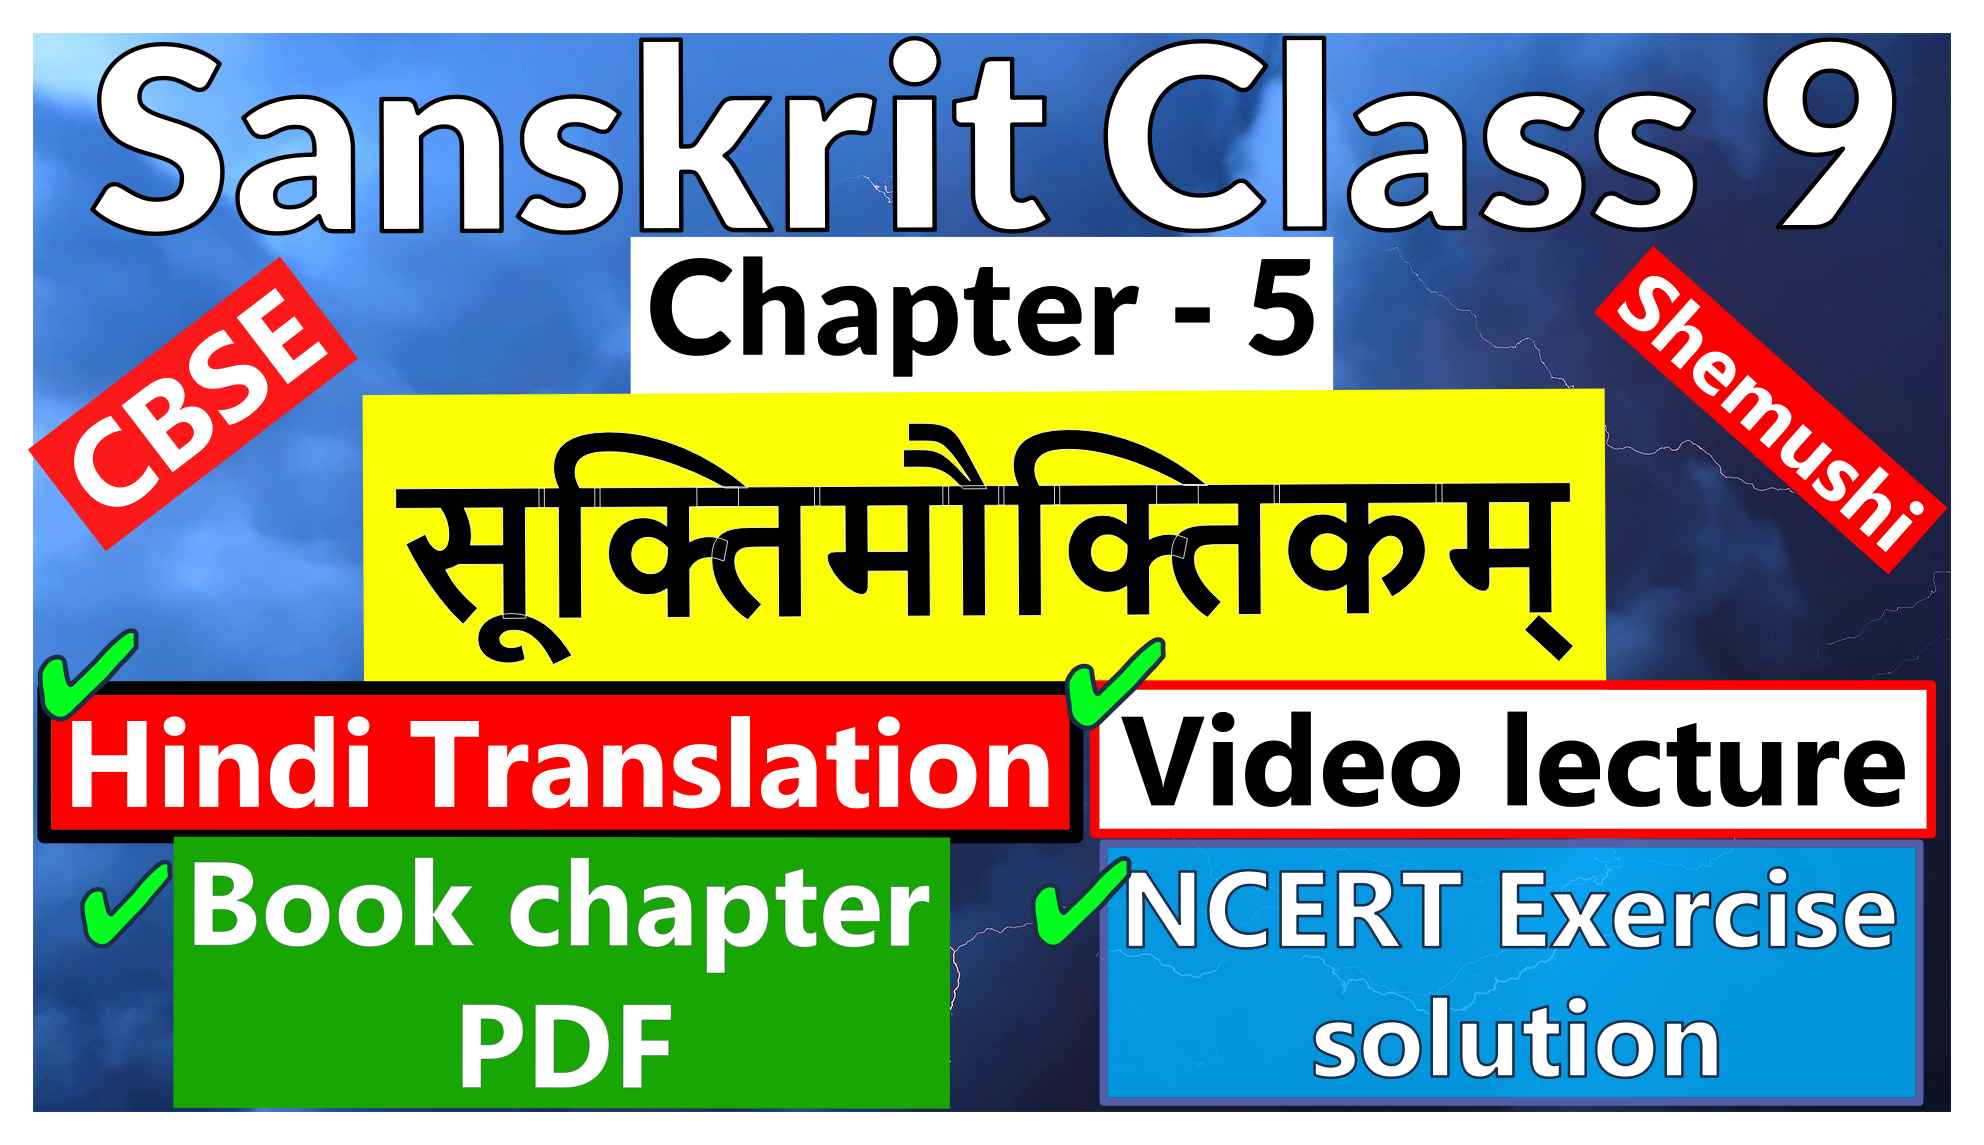 Sanskrit Class 9-chapter 5- सूक्तिमौक्तिकम्- Hindi Translation, Video lecture, NCERT Exercise solution (Question-Answer), Book chapter PDF